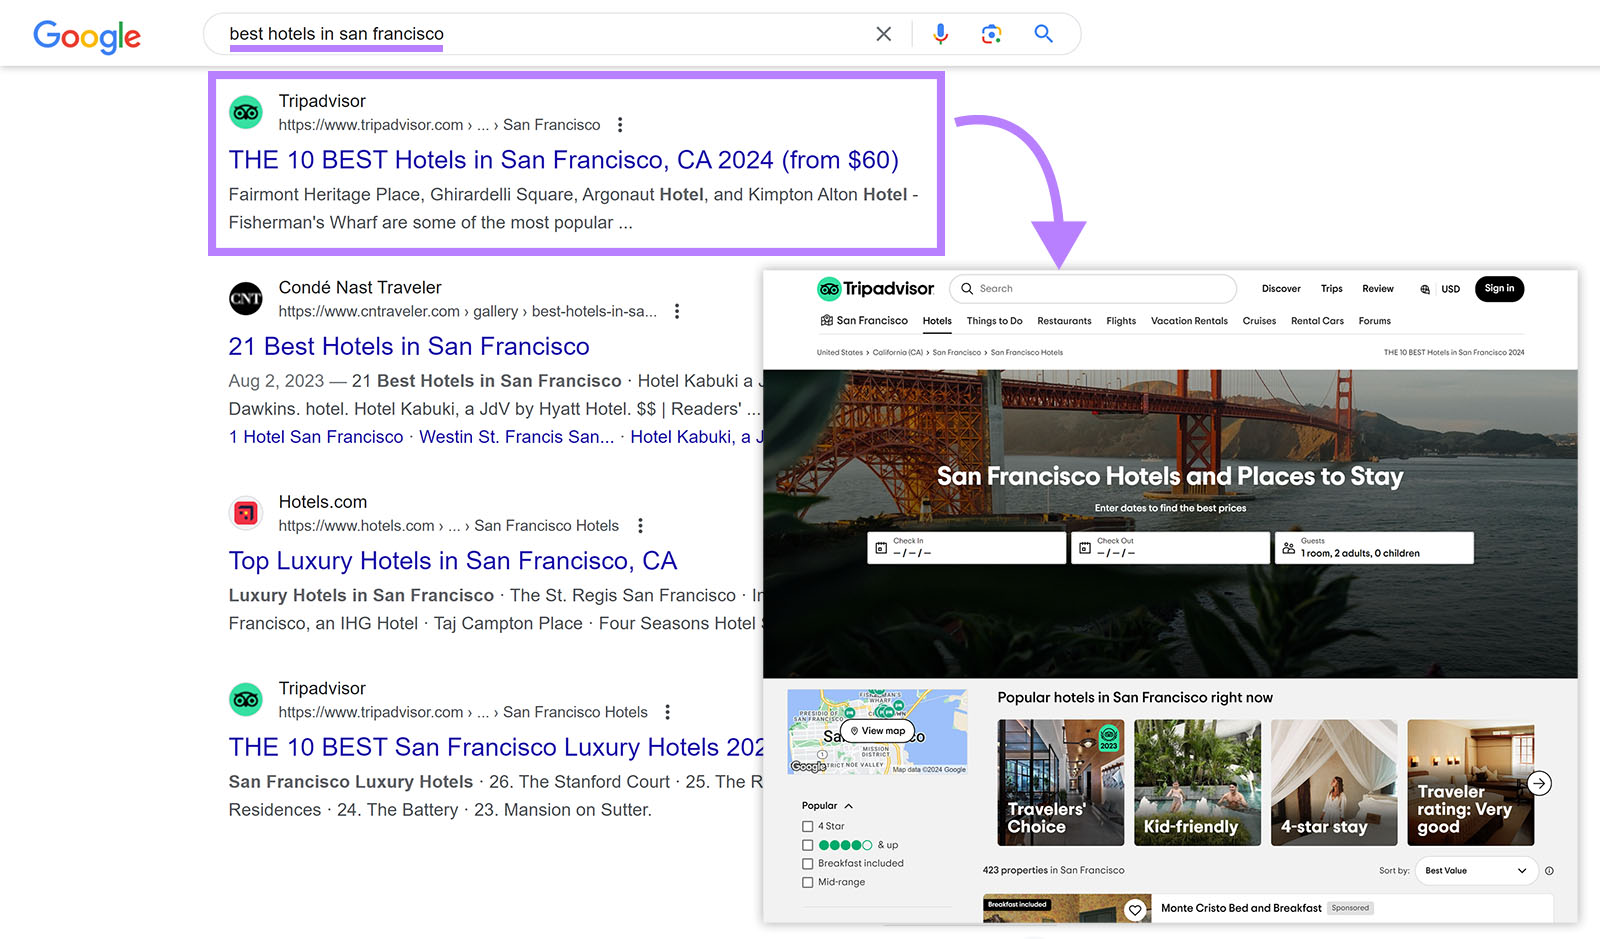 Google search results and Tripadvisor page superimposed with arrow pointing from search result to page.